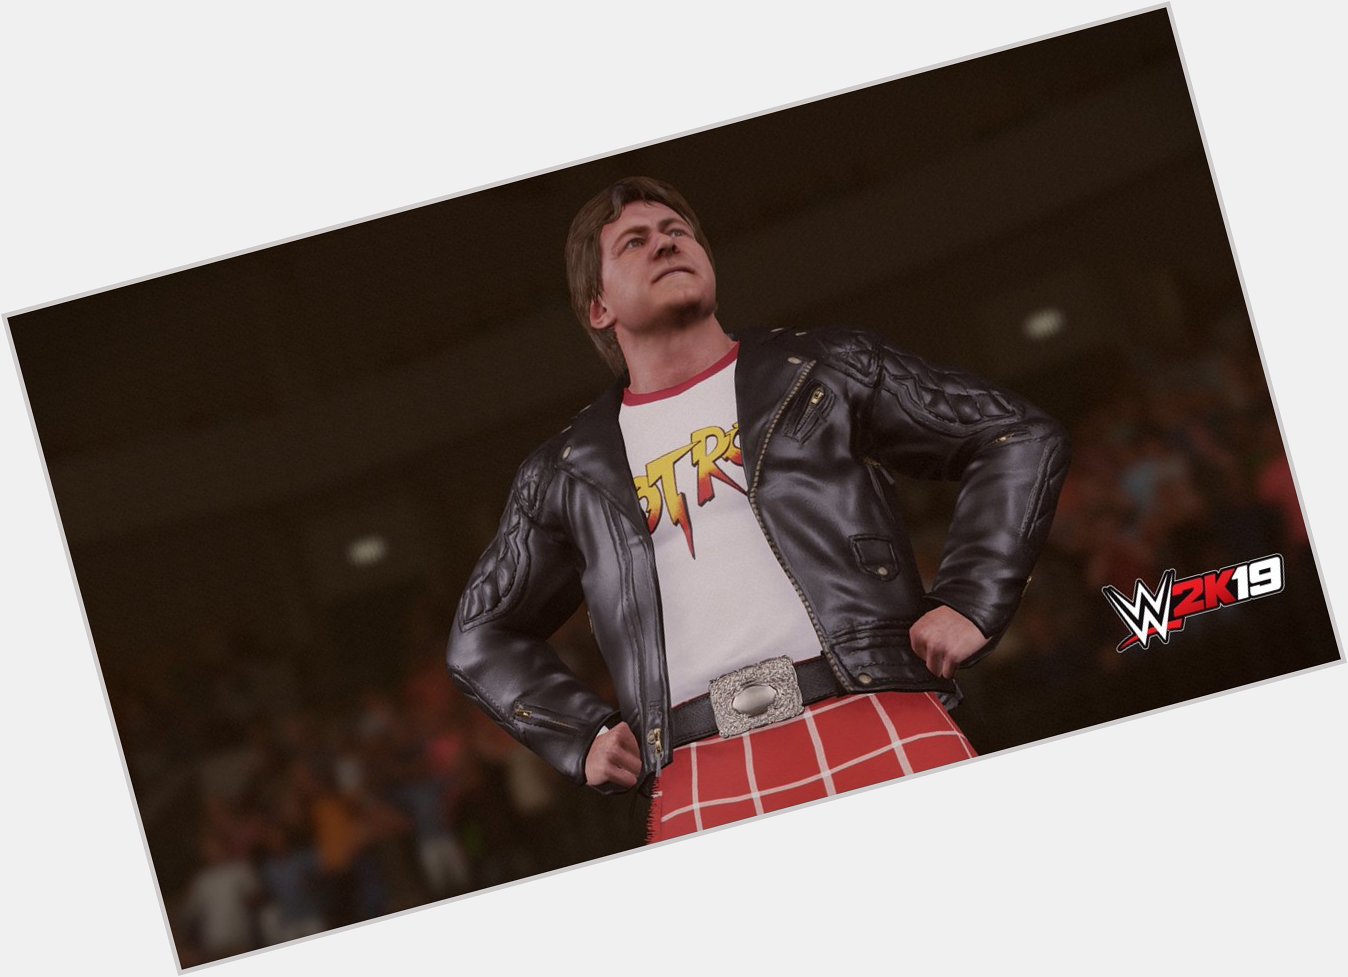 Wishing a special \happy birthday\ to the late, great Rowdy Roddy Piper! 